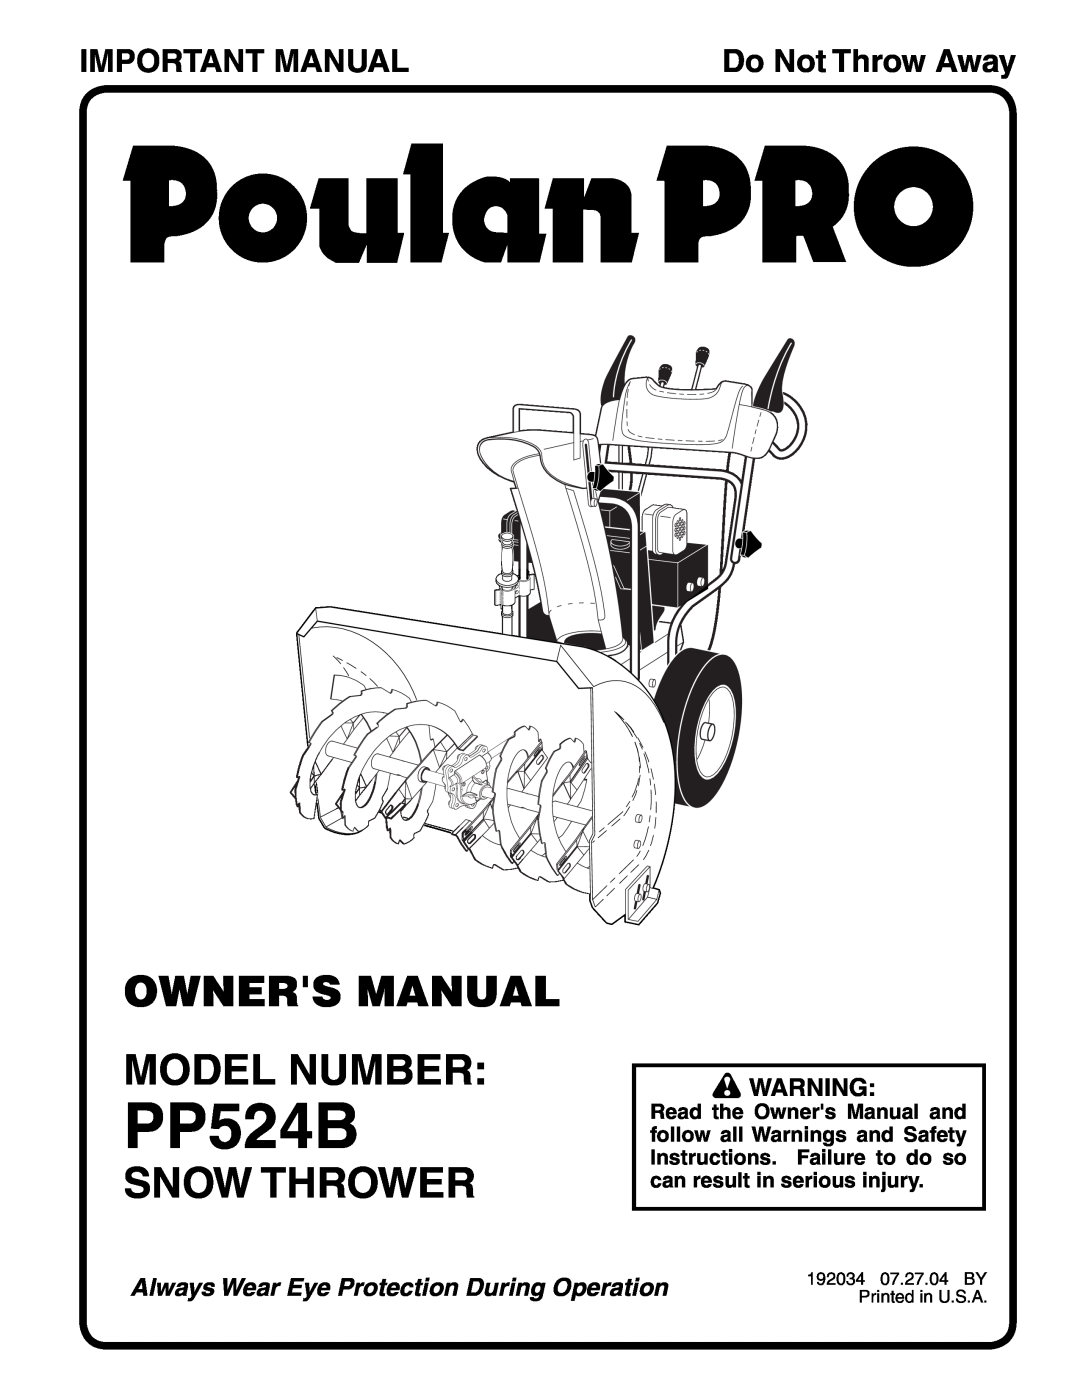 Poulan PP524B owner manual Snow Thrower, Important Manual, Do Not Throw Away, Always Wear Eye Protection During Operation 